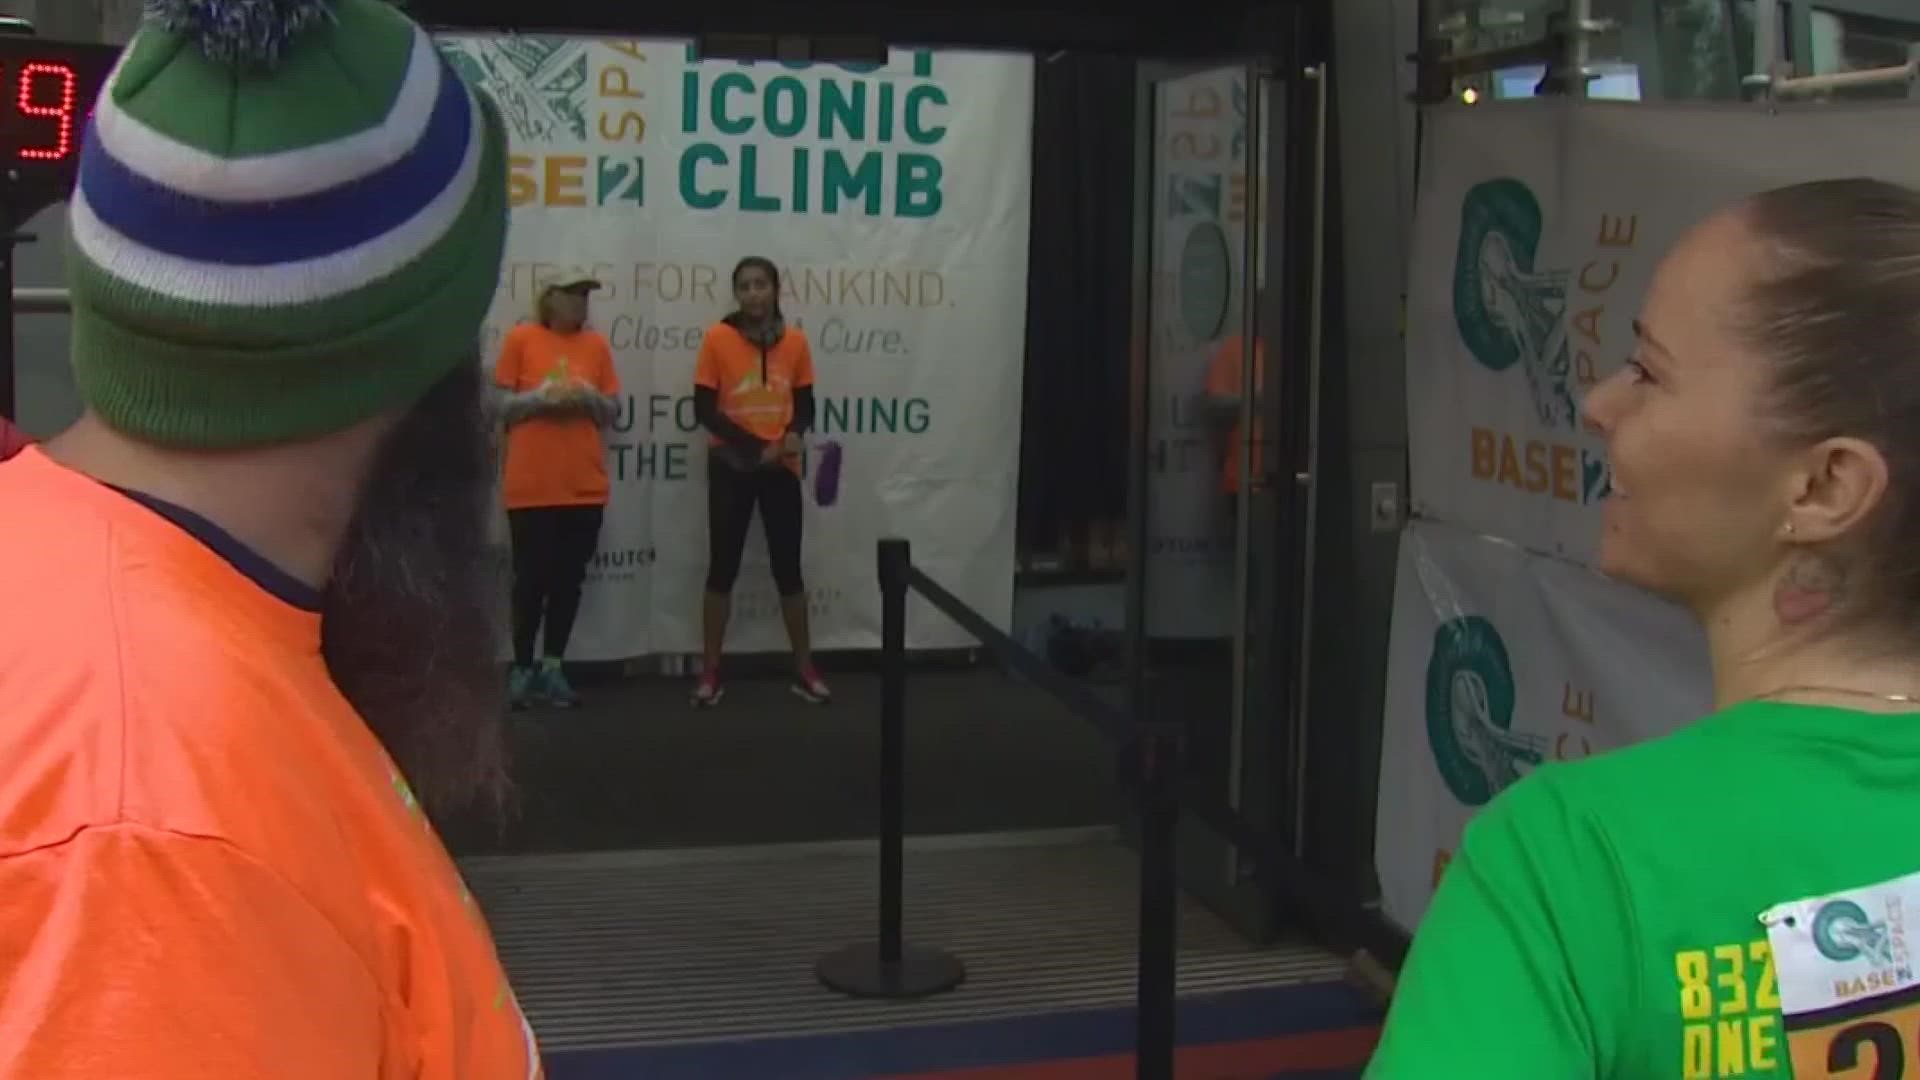 Registration is open for the annual "Base to Space" climb up the 832 stairs of the Space Needle. Benefits from the event supports cancer research.